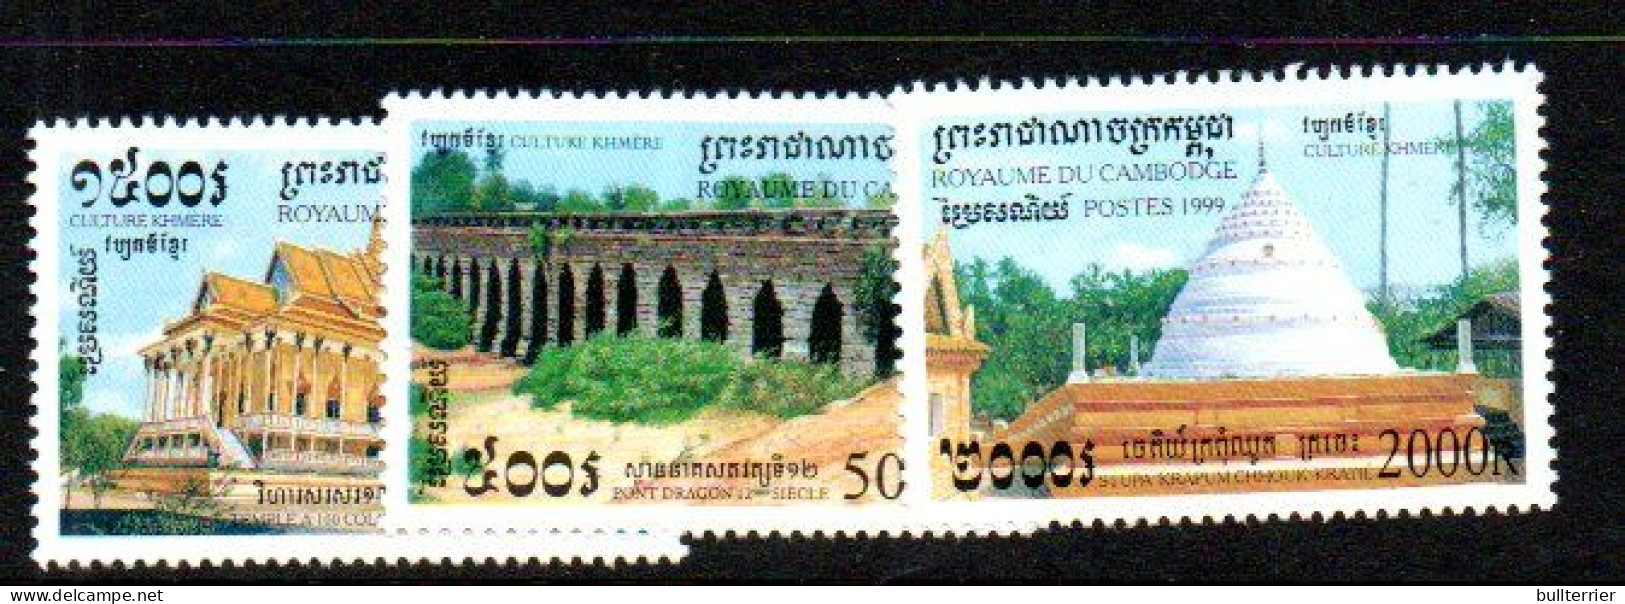 CAMBODIA - 1999 KHMERE CULTURE SET OF 3 MINT NEVER HINGED - Cambodia